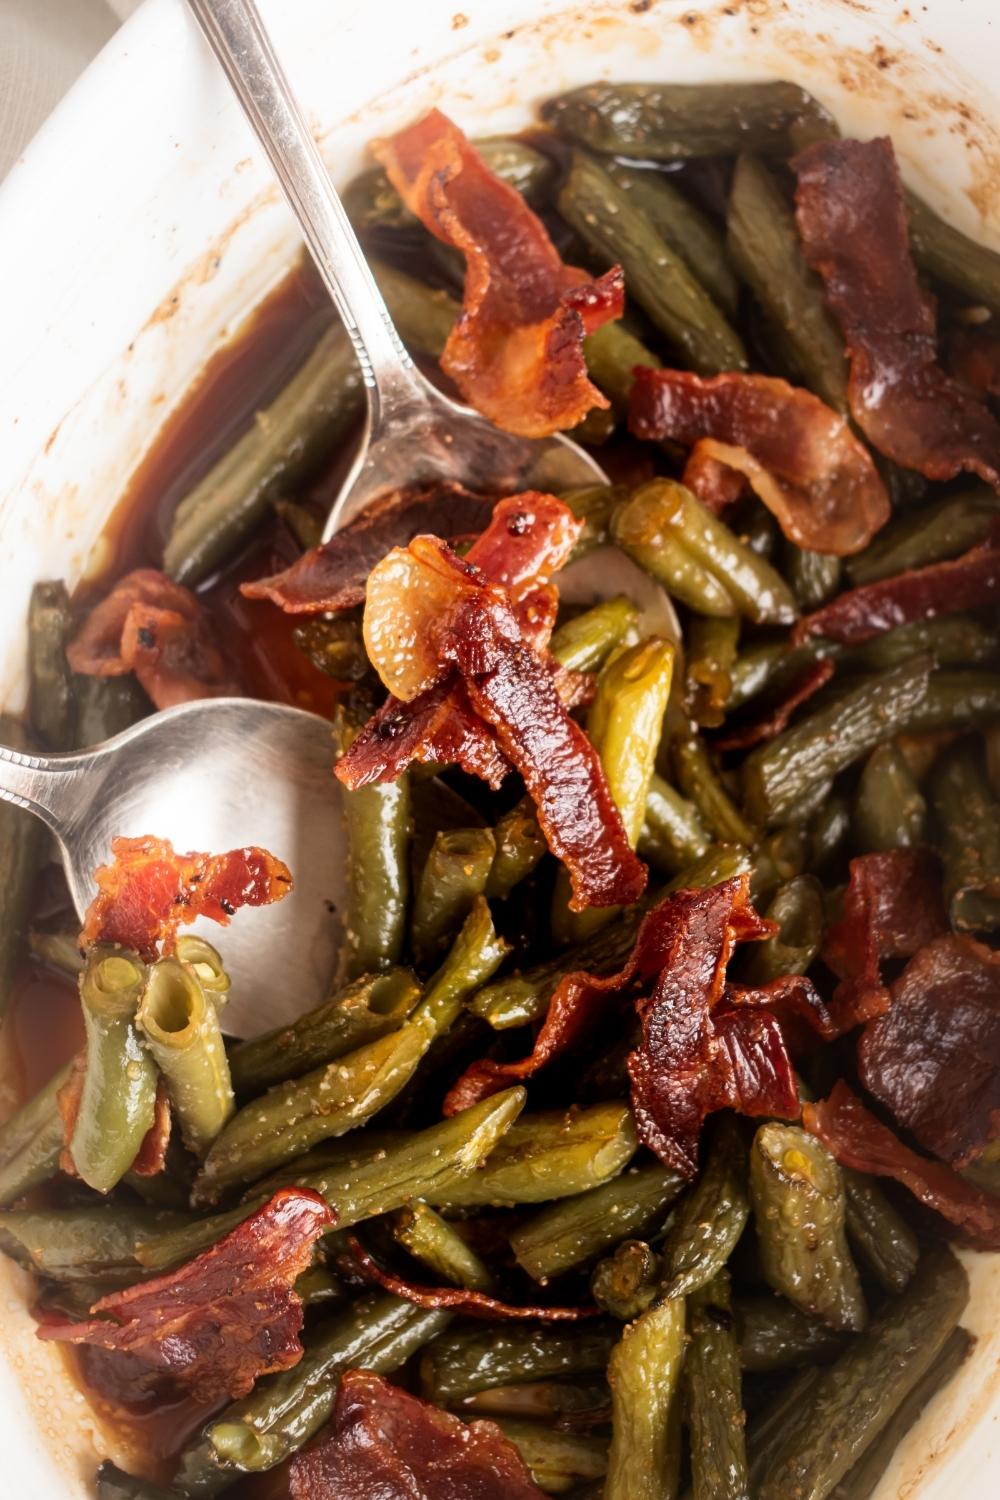 A few pieces of crispy bacon and green beans and white casserole dish.